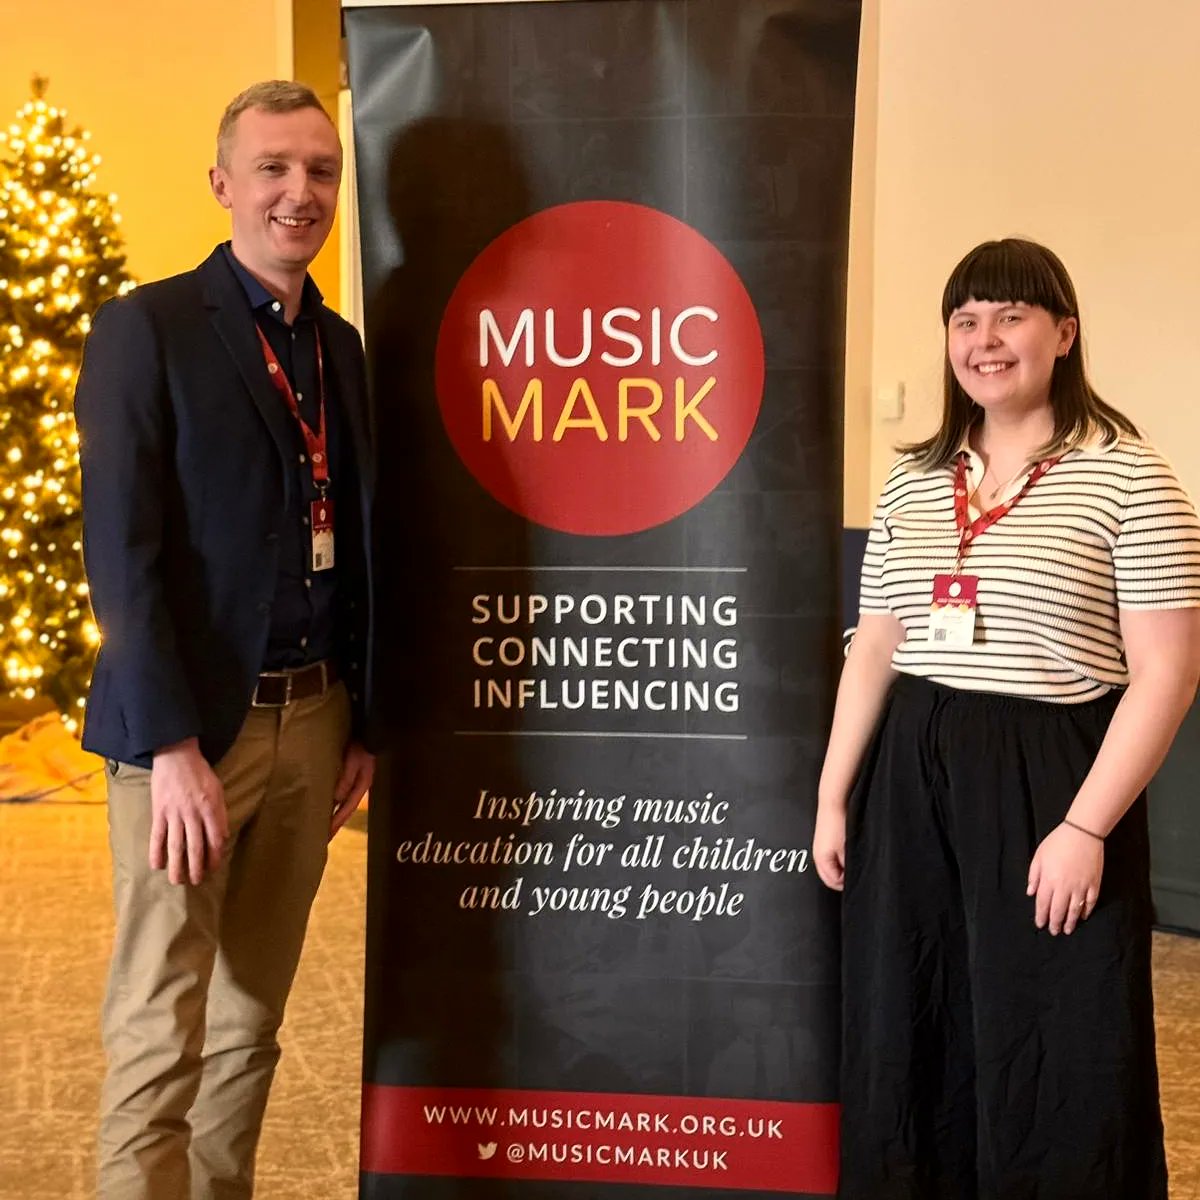 Our barrier-smashing Youth Leadership Coordinator, Elen, and Executive Director, Nick, are having a wonderful time at the @musicmarkuk conference today! 🎶 #MMConference23 #musiceducation #charitytuesday